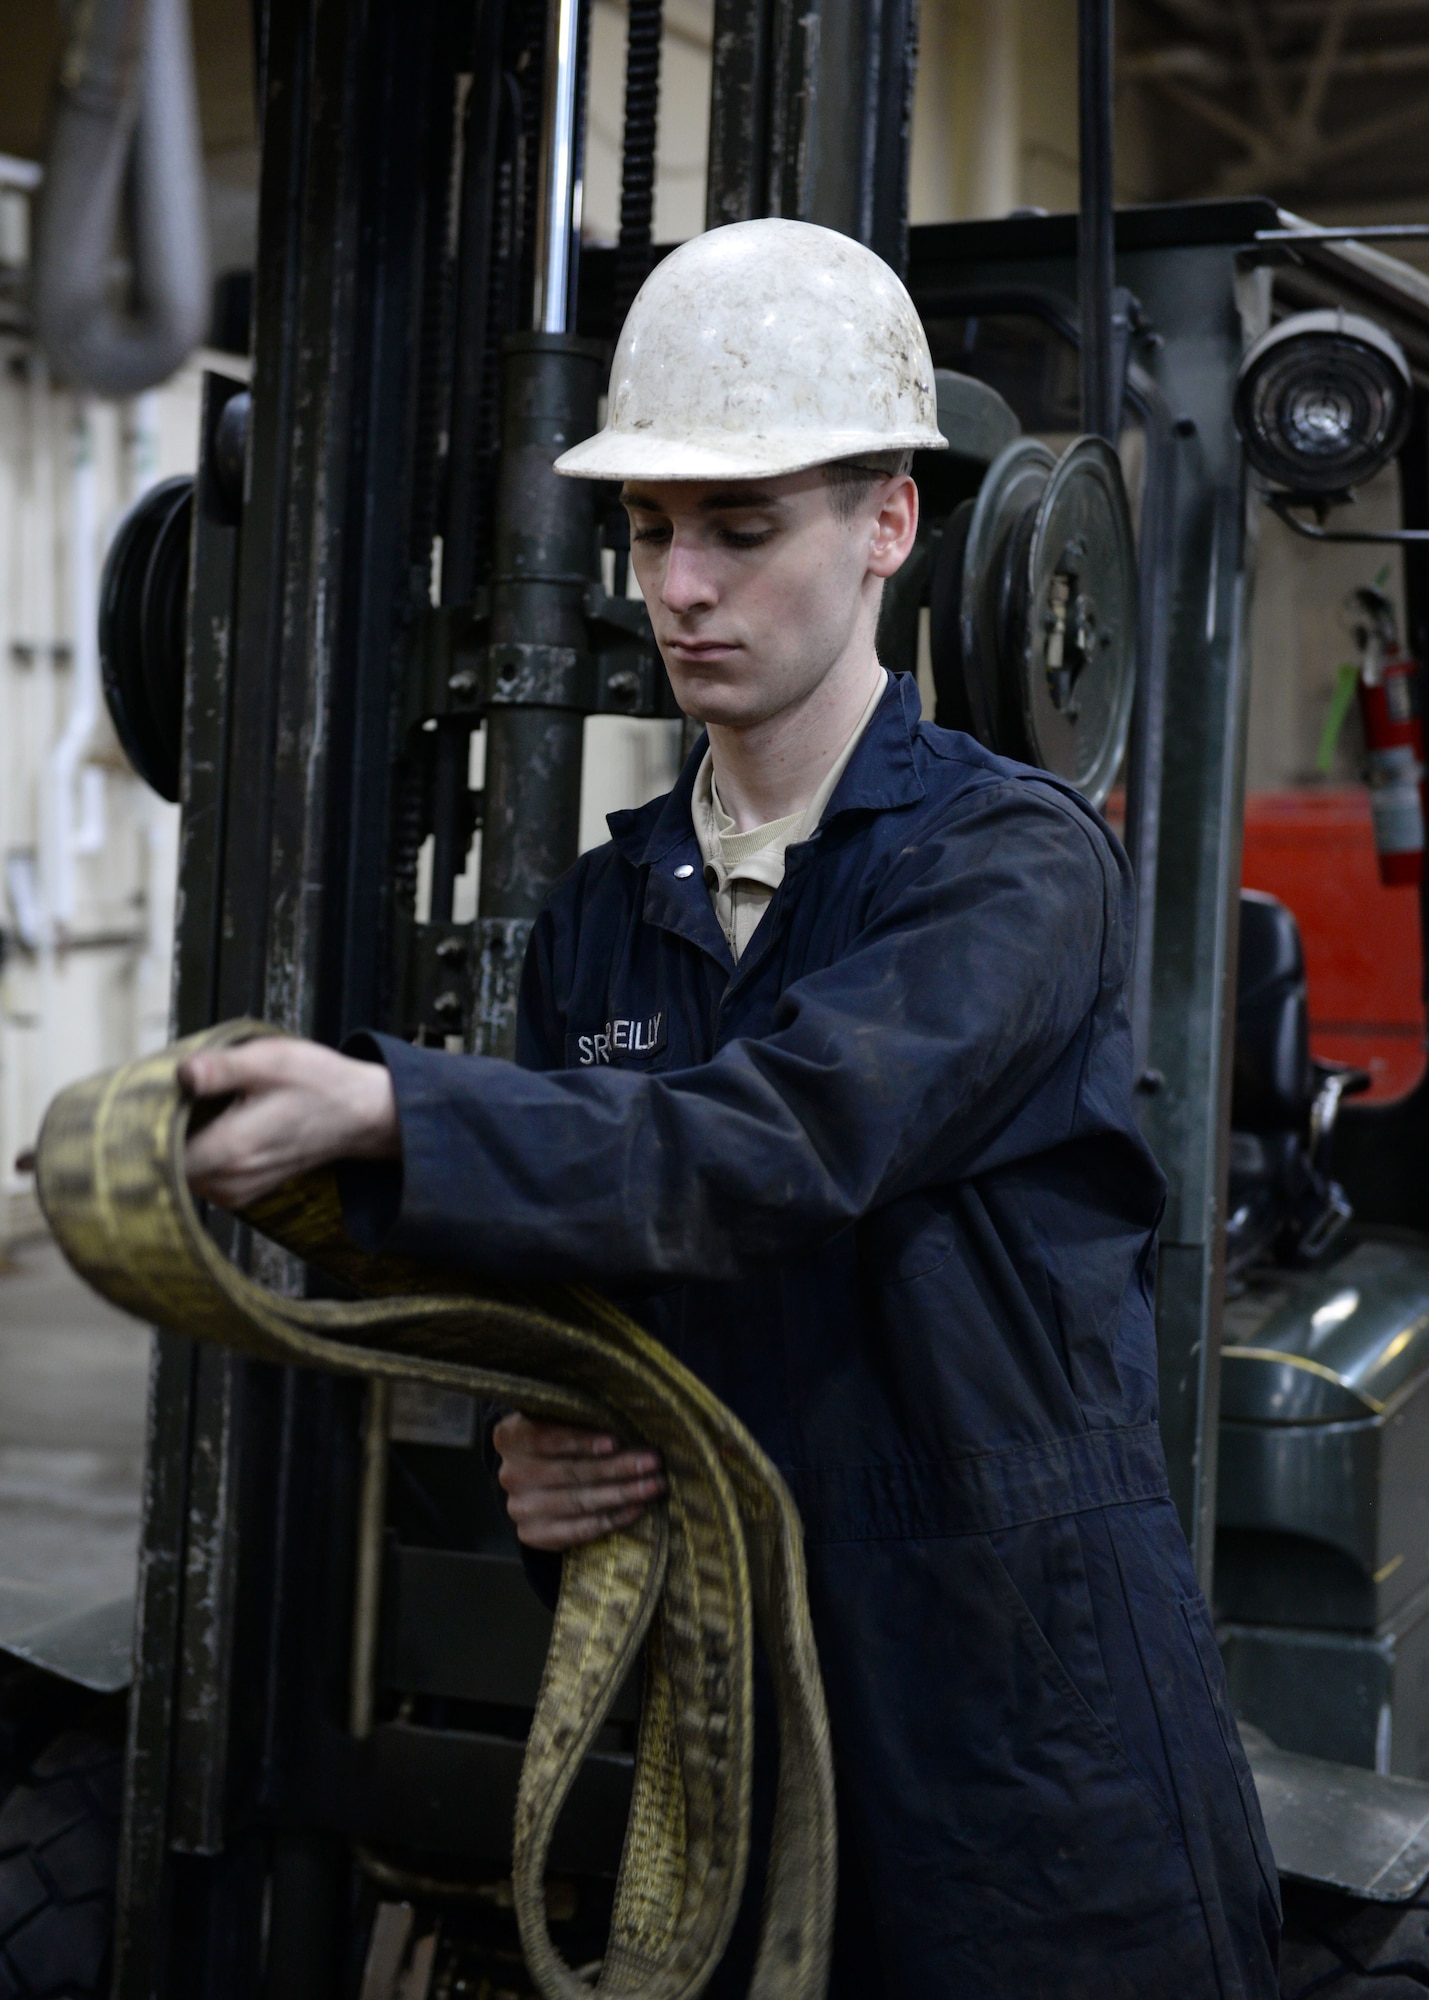 Senior Airman Samuel Reilly, a mission general vehicle equipment maintenance journeyman, with the 673d Logistics Readiness Squadron Vehicle Maintenance, Heavy Equipment shop, organizes tie-straps used for hoisting, Jan. 25, 2018, at Joint Base Elmendorf-Richardson, Alaska. The Heavy Equipment shop repairs and services all snow-removal and road equipment at JBER.